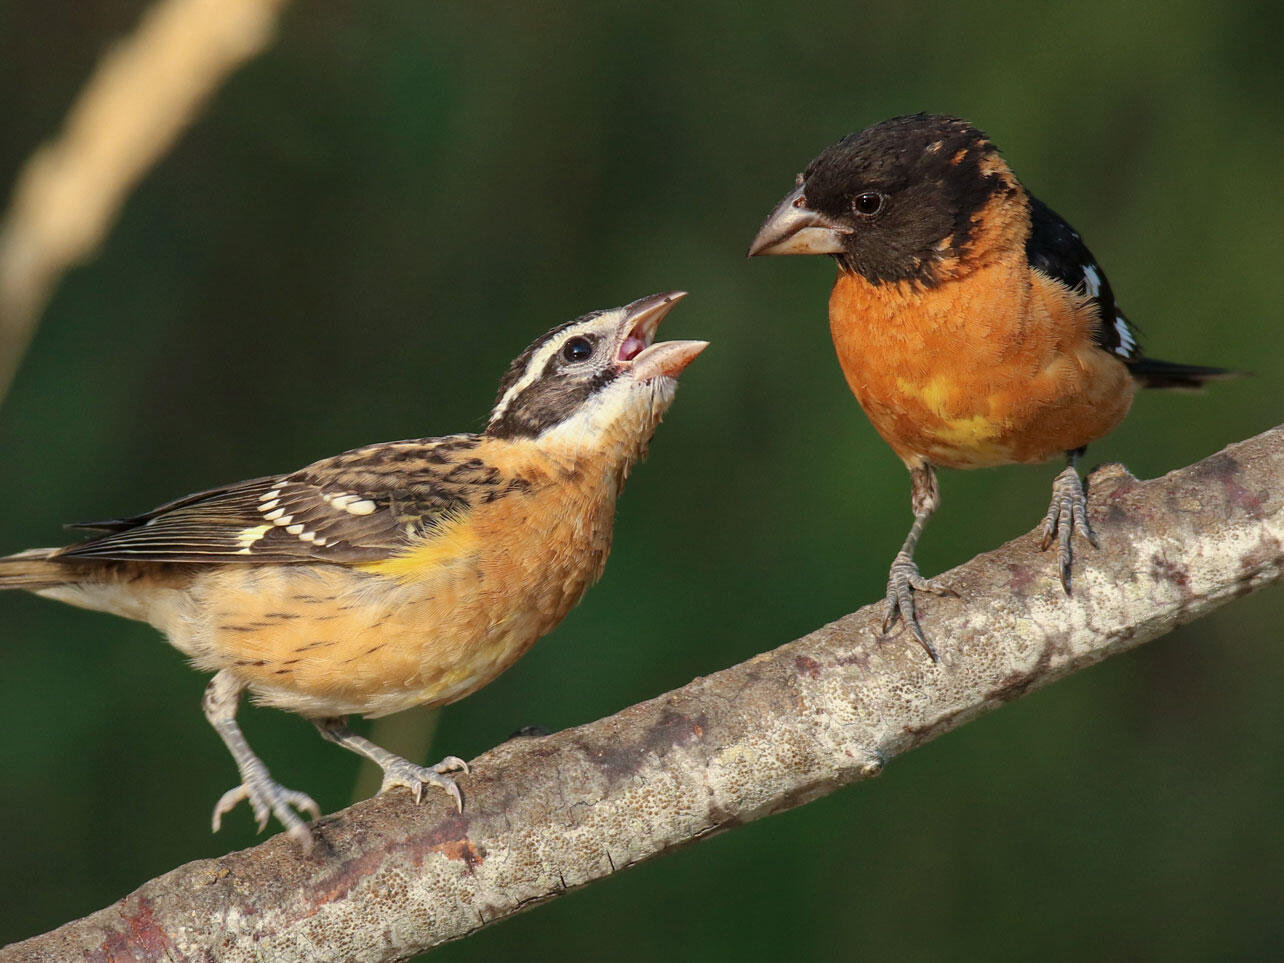 A juvenile Black-headed Grosbeak begs for food from its father.